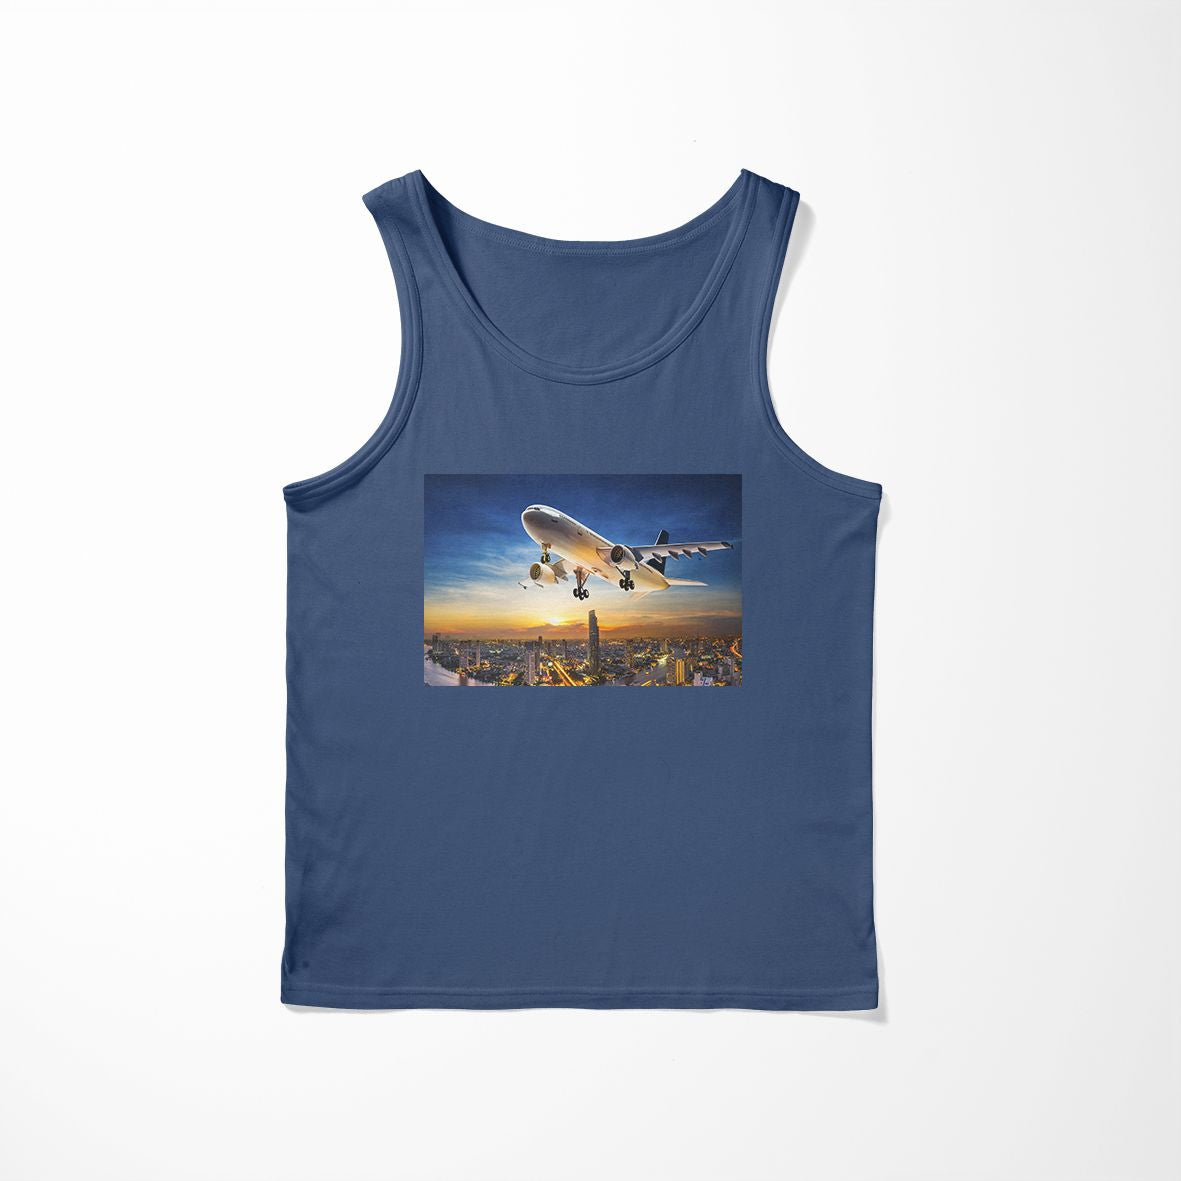 Super Aircraft over City at Sunset Designed Tank Tops